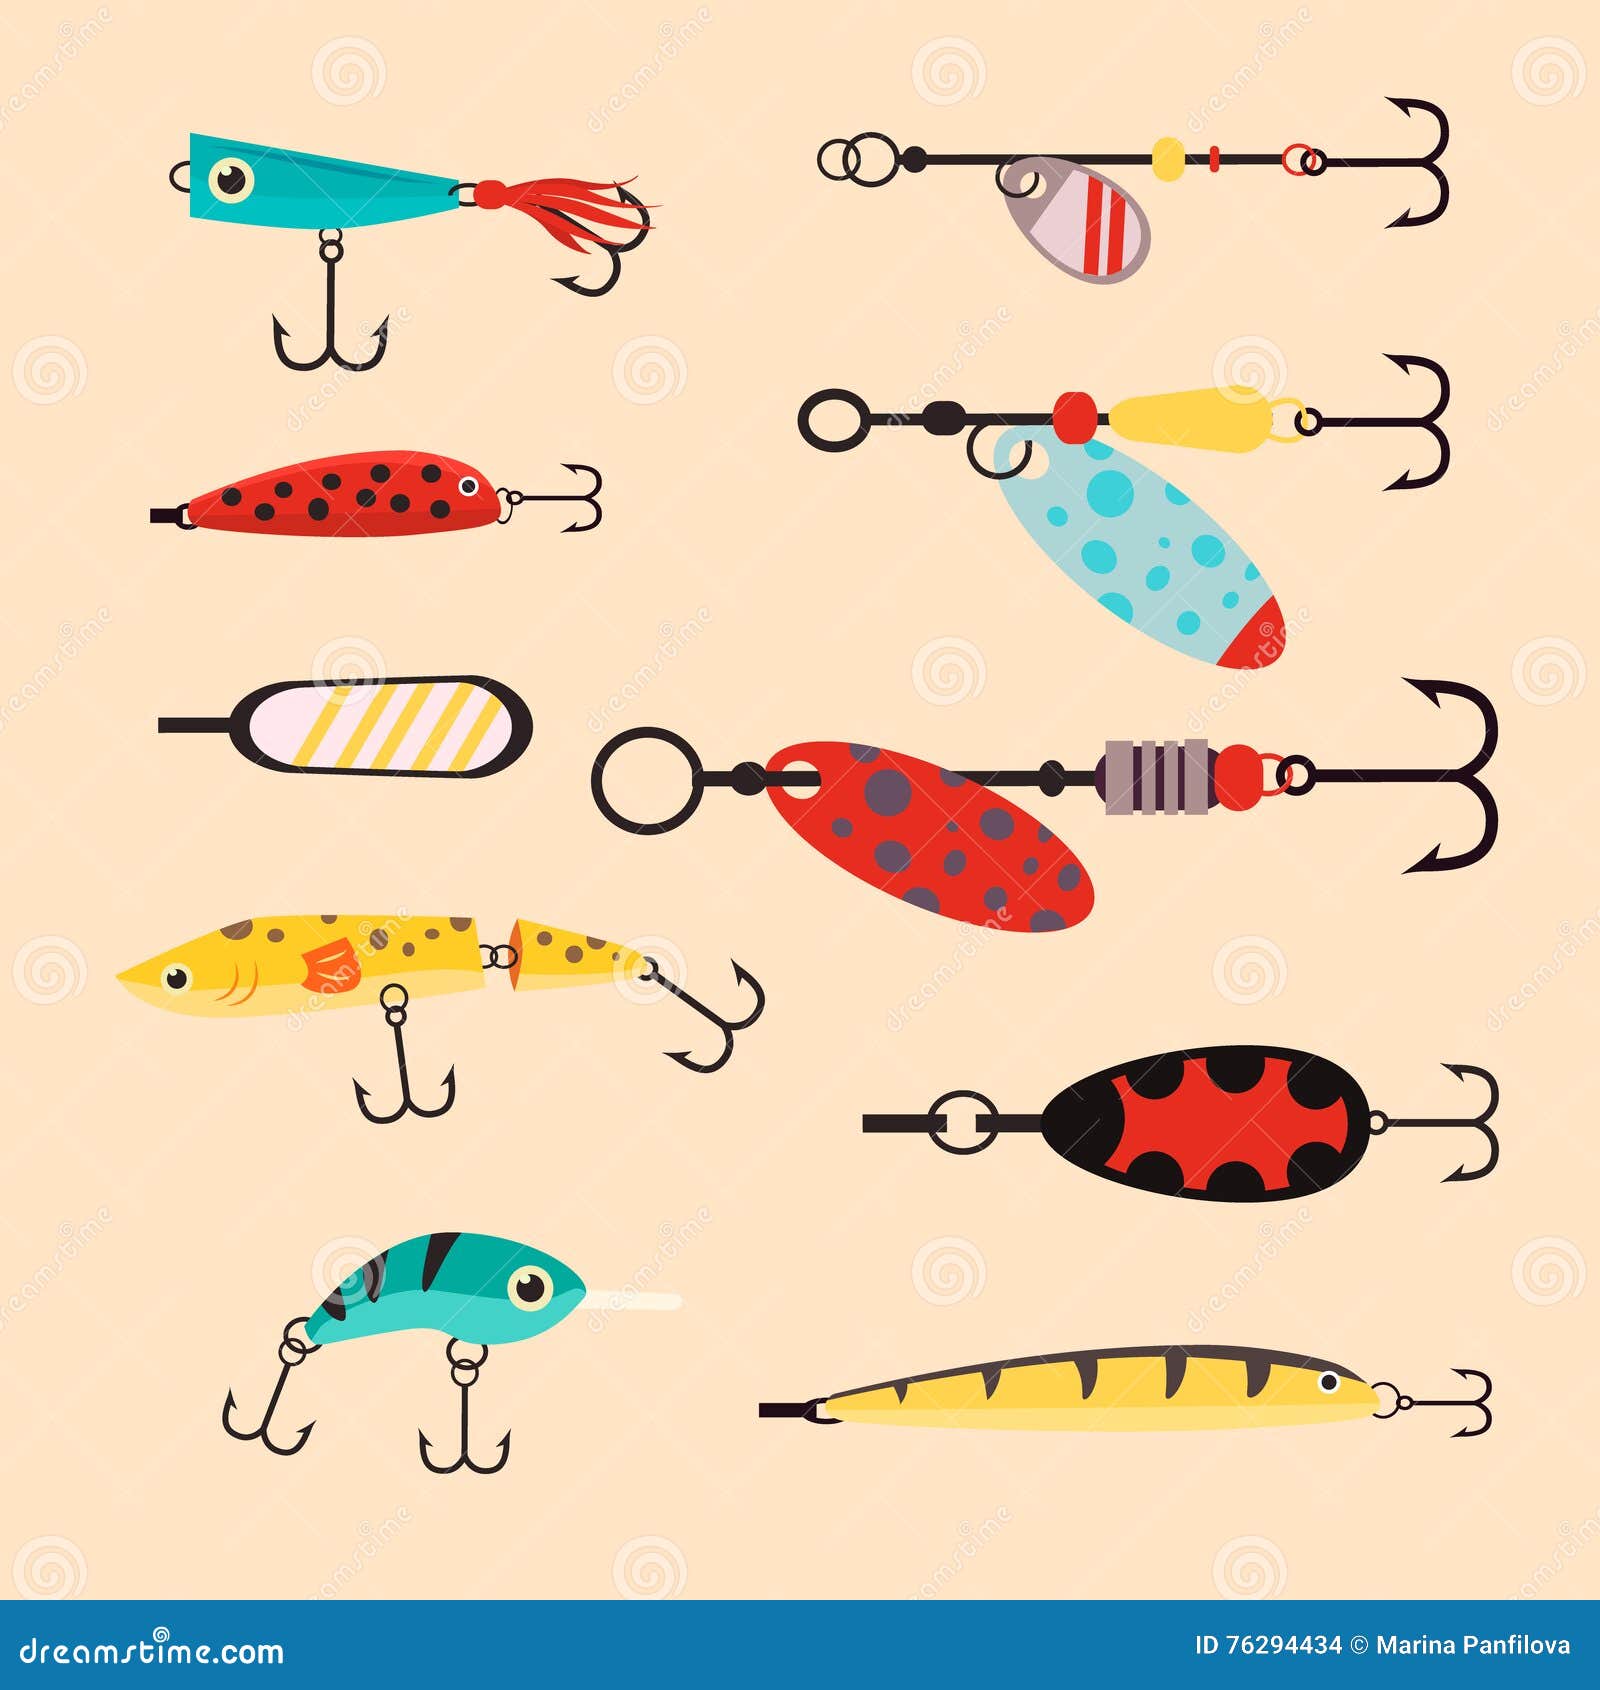 https://thumbs.dreamstime.com/z/fishing-tools-illustration-colorful-lures-isolated-different-baits-collection-vector-icons-76294434.jpg